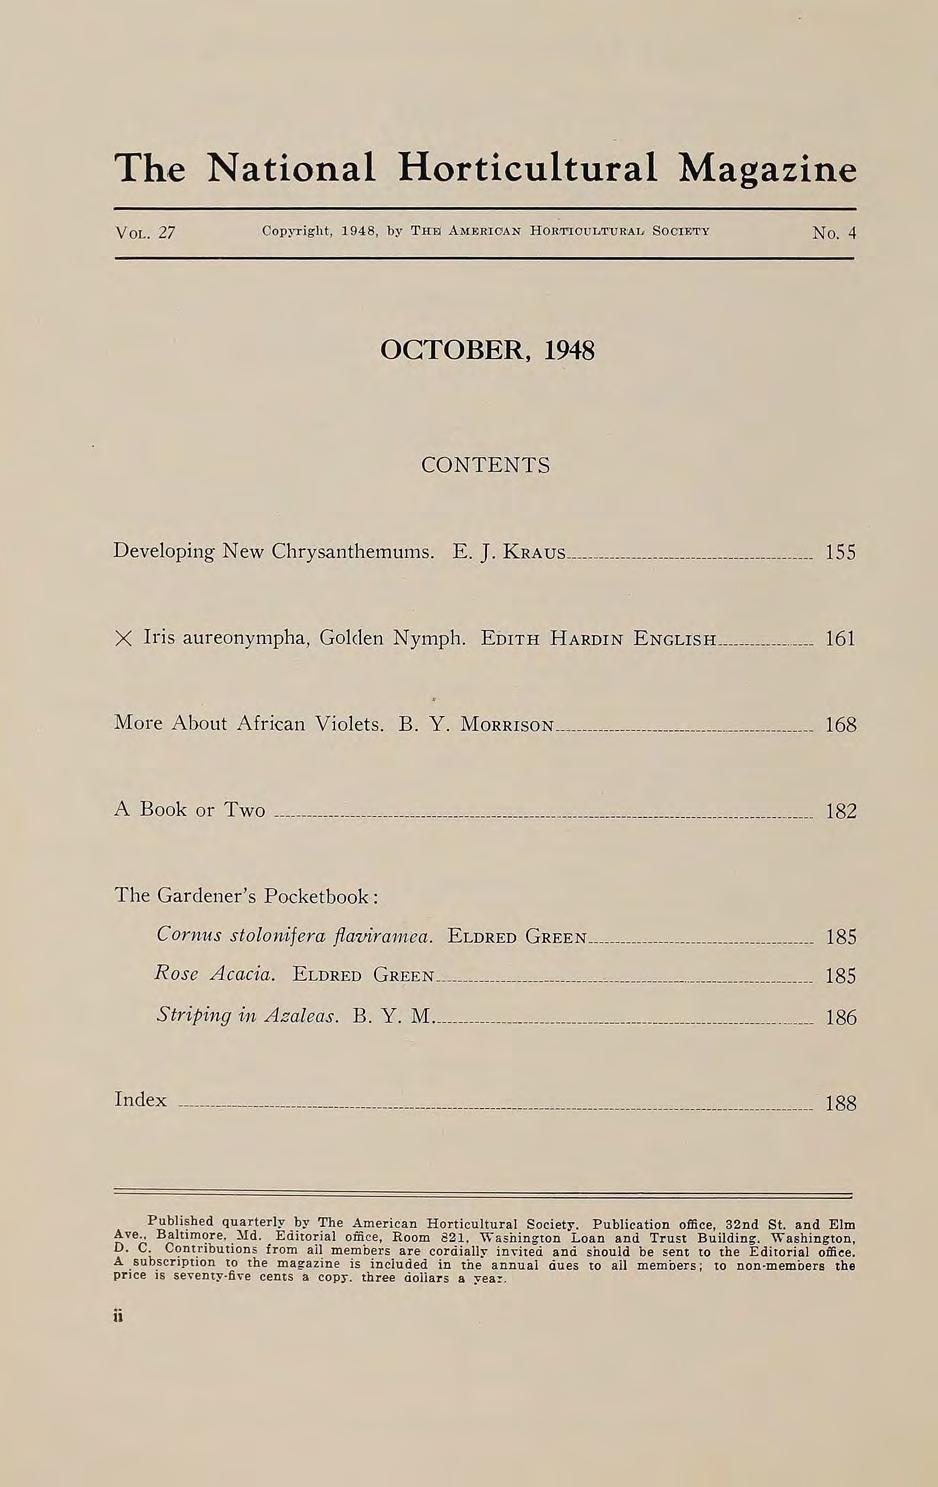 The National Horticultural Magazine VOL. 27 Copyright, 1948, by Tlnl AMER>IOAN HORIl'IOULTVR'AL SOmETY No.4 OCTOBER,1948 CONTENTS Developing New Chrysanthemums. E. J.